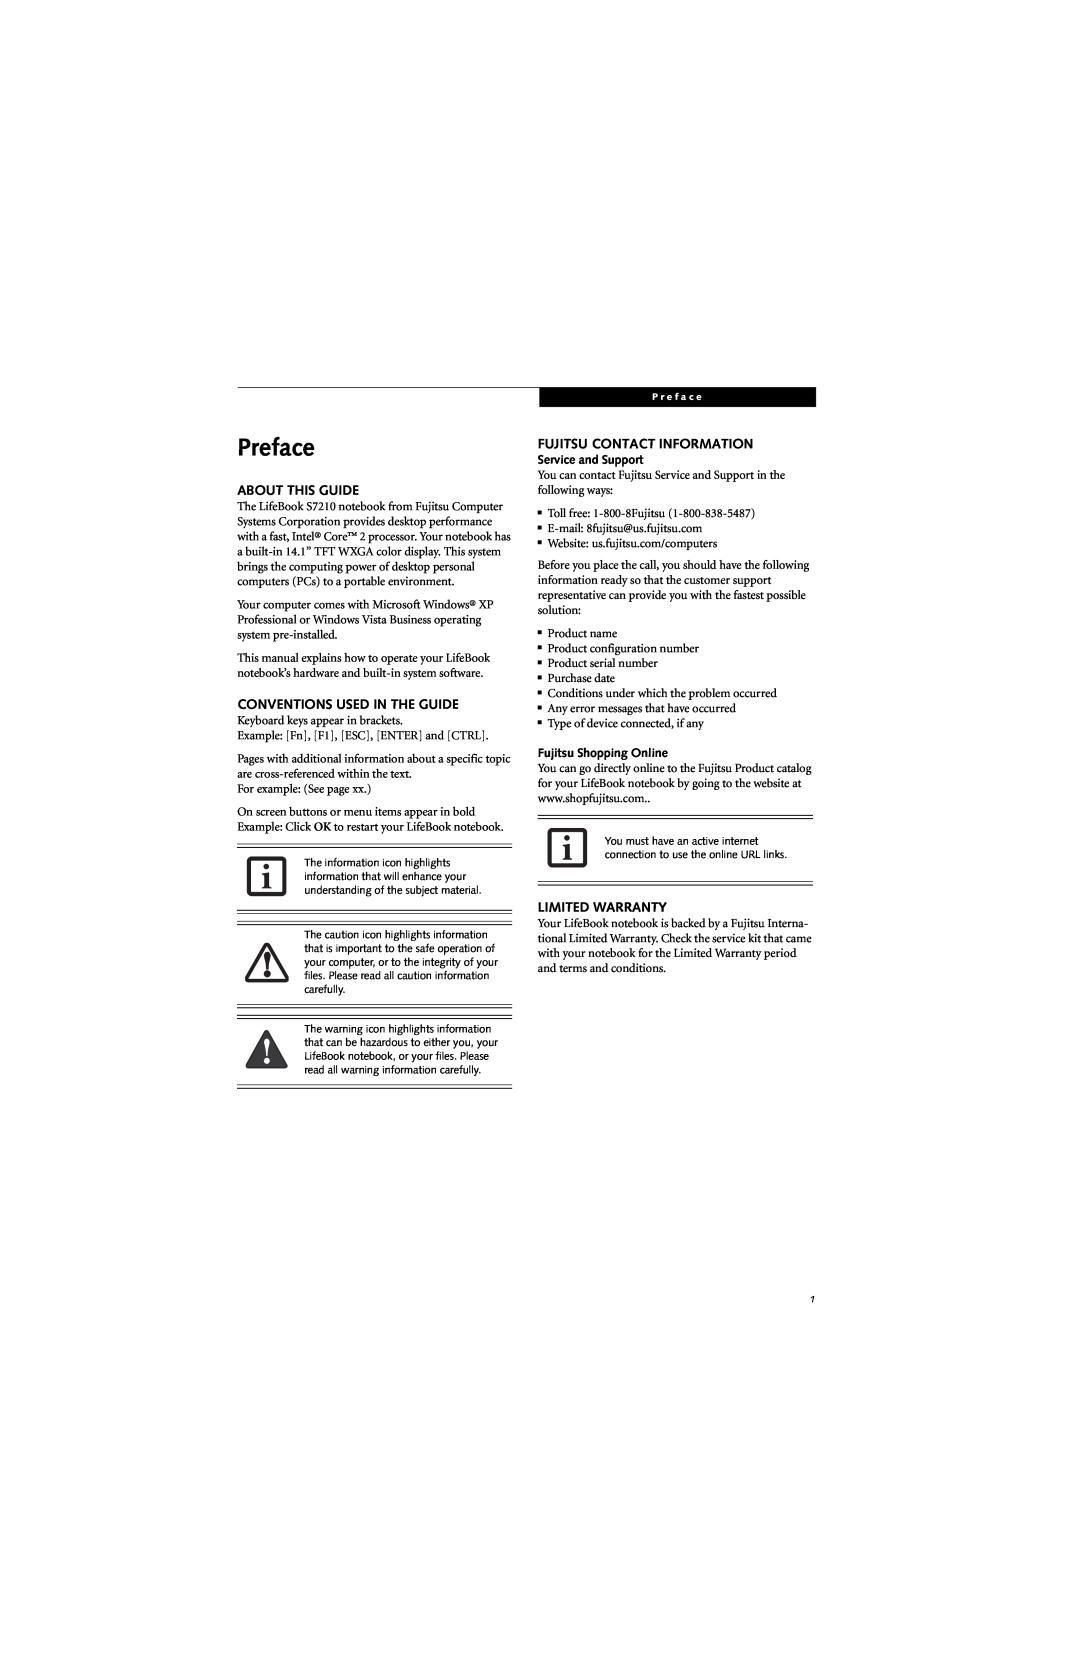 Fujitsu S7210 Preface, About This Guide, Conventions Used In The Guide, Fujitsu Contact Information, Limited Warranty 